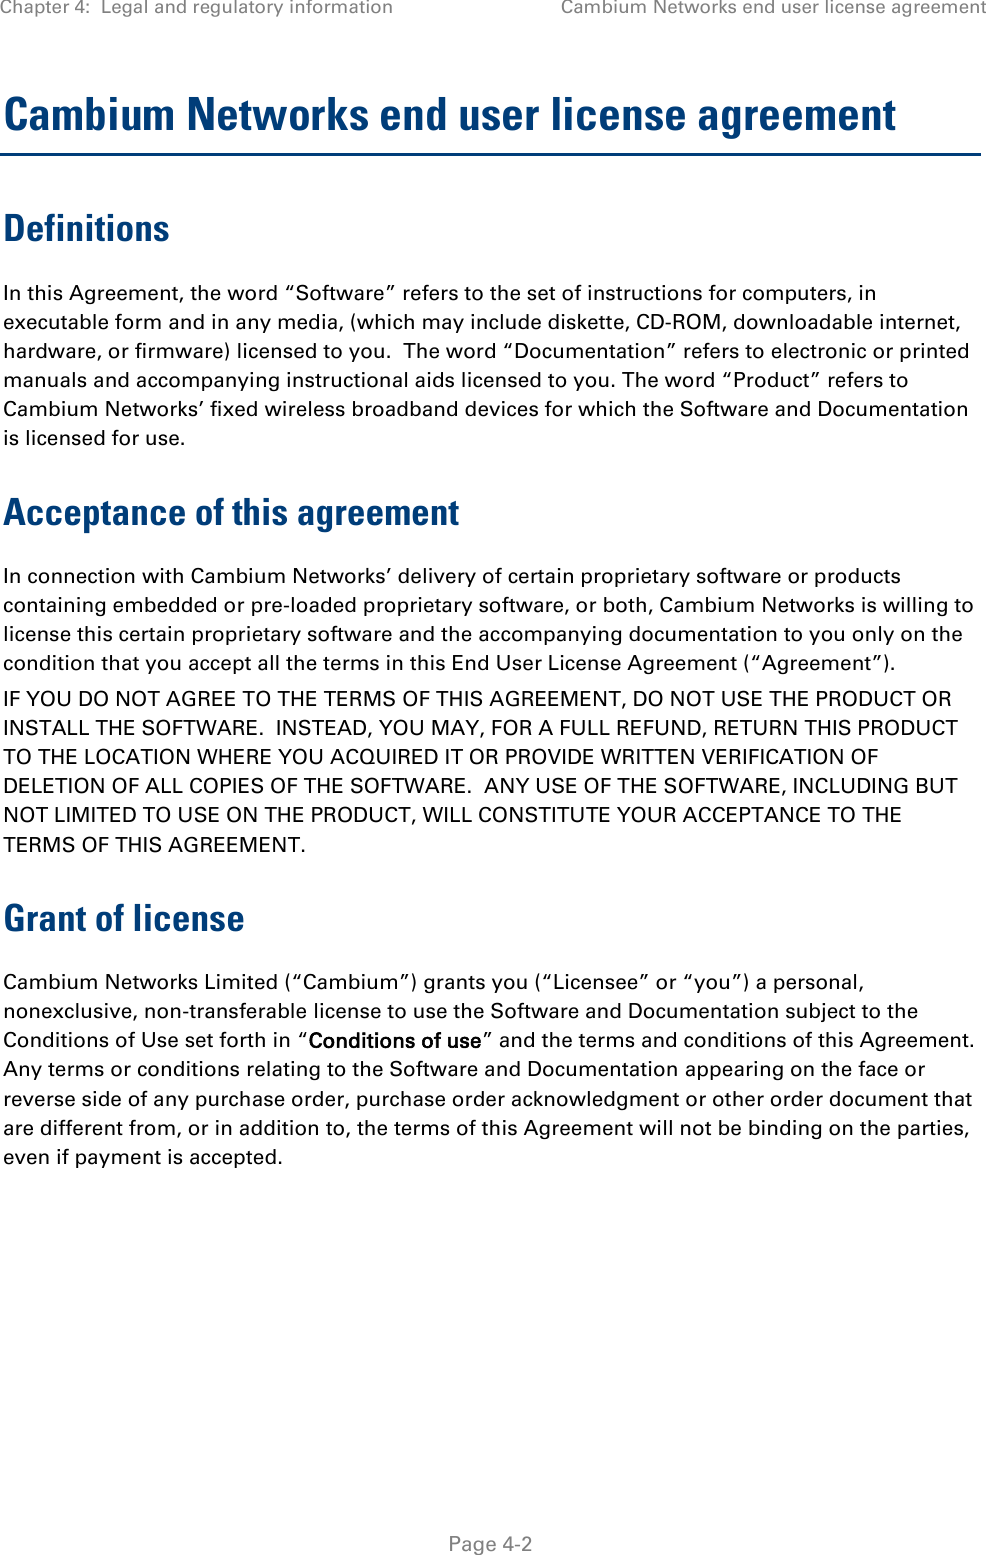 Chapter 4:  Legal and regulatory information Cambium Networks end user license agreement   Page 4-2 Cambium Networks end user license agreement Definitions In this Agreement, the word “Software” refers to the set of instructions for computers, in executable form and in any media, (which may include diskette, CD-ROM, downloadable internet, hardware, or firmware) licensed to you.  The word “Documentation” refers to electronic or printed manuals and accompanying instructional aids licensed to you. The word “Product” refers to Cambium Networks’ fixed wireless broadband devices for which the Software and Documentation is licensed for use. Acceptance of this agreement In connection with Cambium Networks’ delivery of certain proprietary software or products containing embedded or pre-loaded proprietary software, or both, Cambium Networks is willing to license this certain proprietary software and the accompanying documentation to you only on the condition that you accept all the terms in this End User License Agreement (“Agreement”). IF YOU DO NOT AGREE TO THE TERMS OF THIS AGREEMENT, DO NOT USE THE PRODUCT OR INSTALL THE SOFTWARE.  INSTEAD, YOU MAY, FOR A FULL REFUND, RETURN THIS PRODUCT TO THE LOCATION WHERE YOU ACQUIRED IT OR PROVIDE WRITTEN VERIFICATION OF DELETION OF ALL COPIES OF THE SOFTWARE.  ANY USE OF THE SOFTWARE, INCLUDING BUT NOT LIMITED TO USE ON THE PRODUCT, WILL CONSTITUTE YOUR ACCEPTANCE TO THE TERMS OF THIS AGREEMENT.  Grant of license Cambium Networks Limited (“Cambium”) grants you (“Licensee” or “you”) a personal, nonexclusive, non-transferable license to use the Software and Documentation subject to the Conditions of Use set forth in “Conditions of use” and the terms and conditions of this Agreement.  Any terms or conditions relating to the Software and Documentation appearing on the face or reverse side of any purchase order, purchase order acknowledgment or other order document that are different from, or in addition to, the terms of this Agreement will not be binding on the parties, even if payment is accepted. 